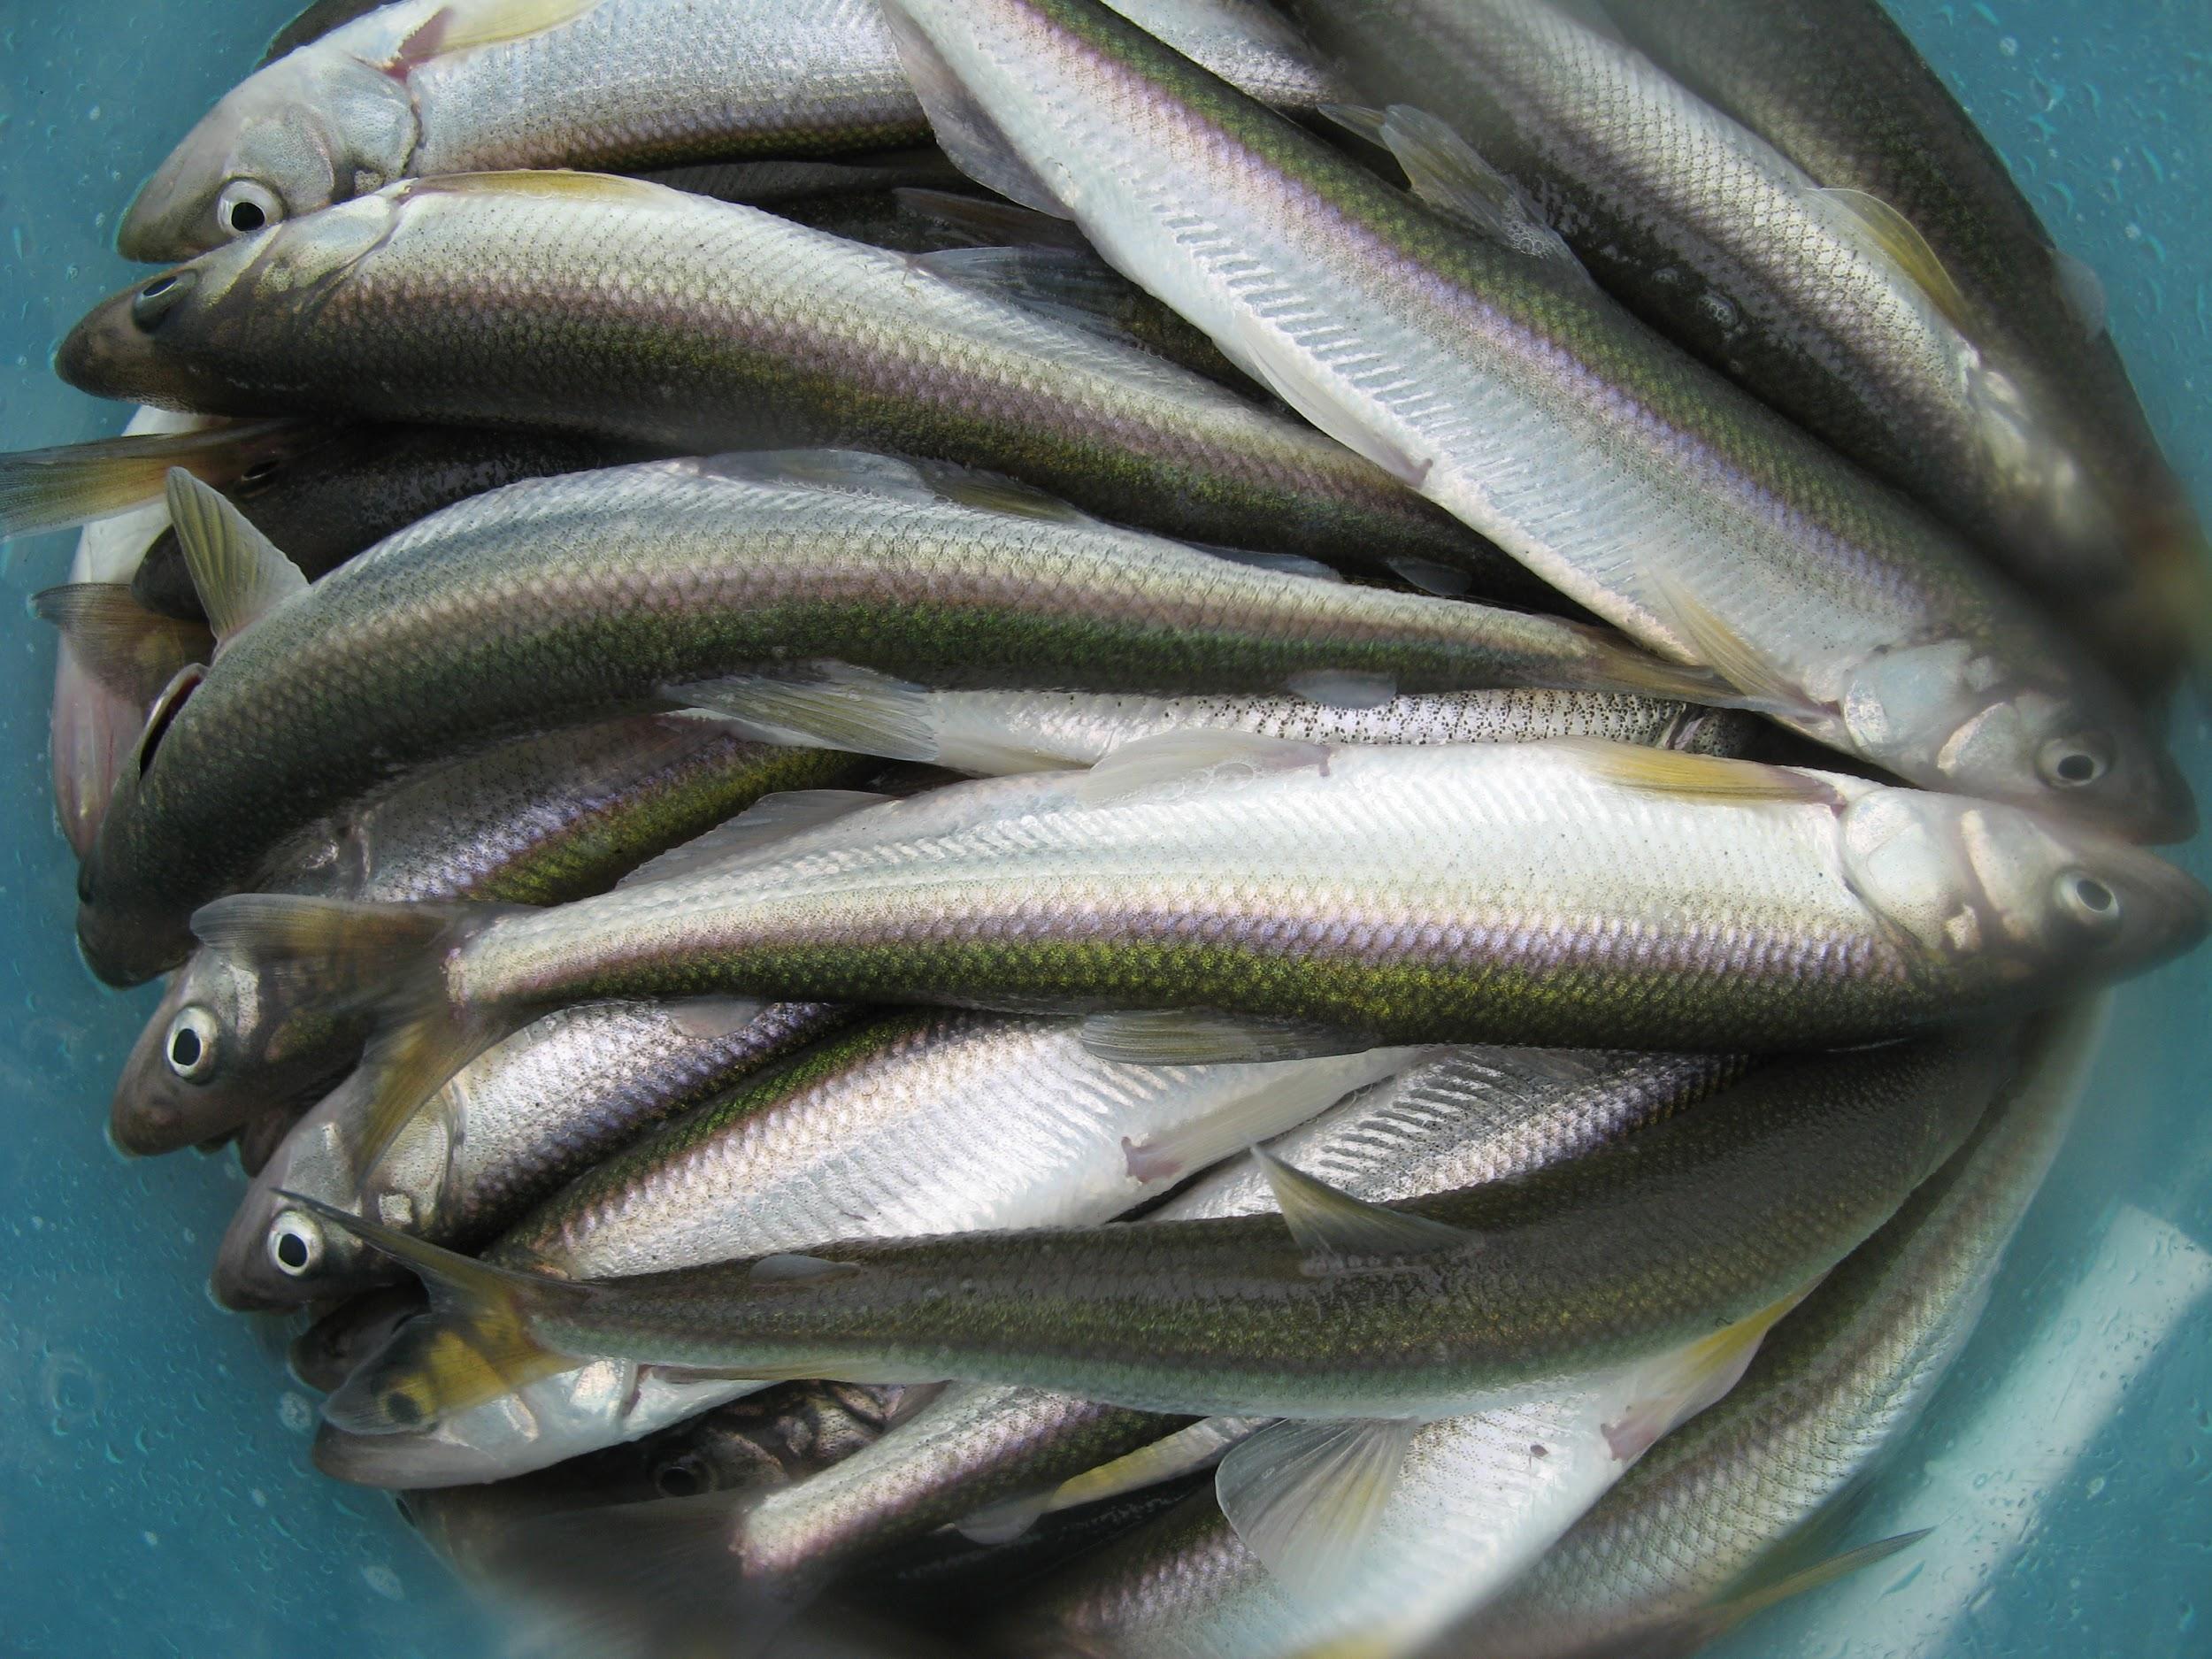 A photo of approximately a dozen eulachon smelt in a bucket. Eulachon smelt are small, silvery-blue fish.